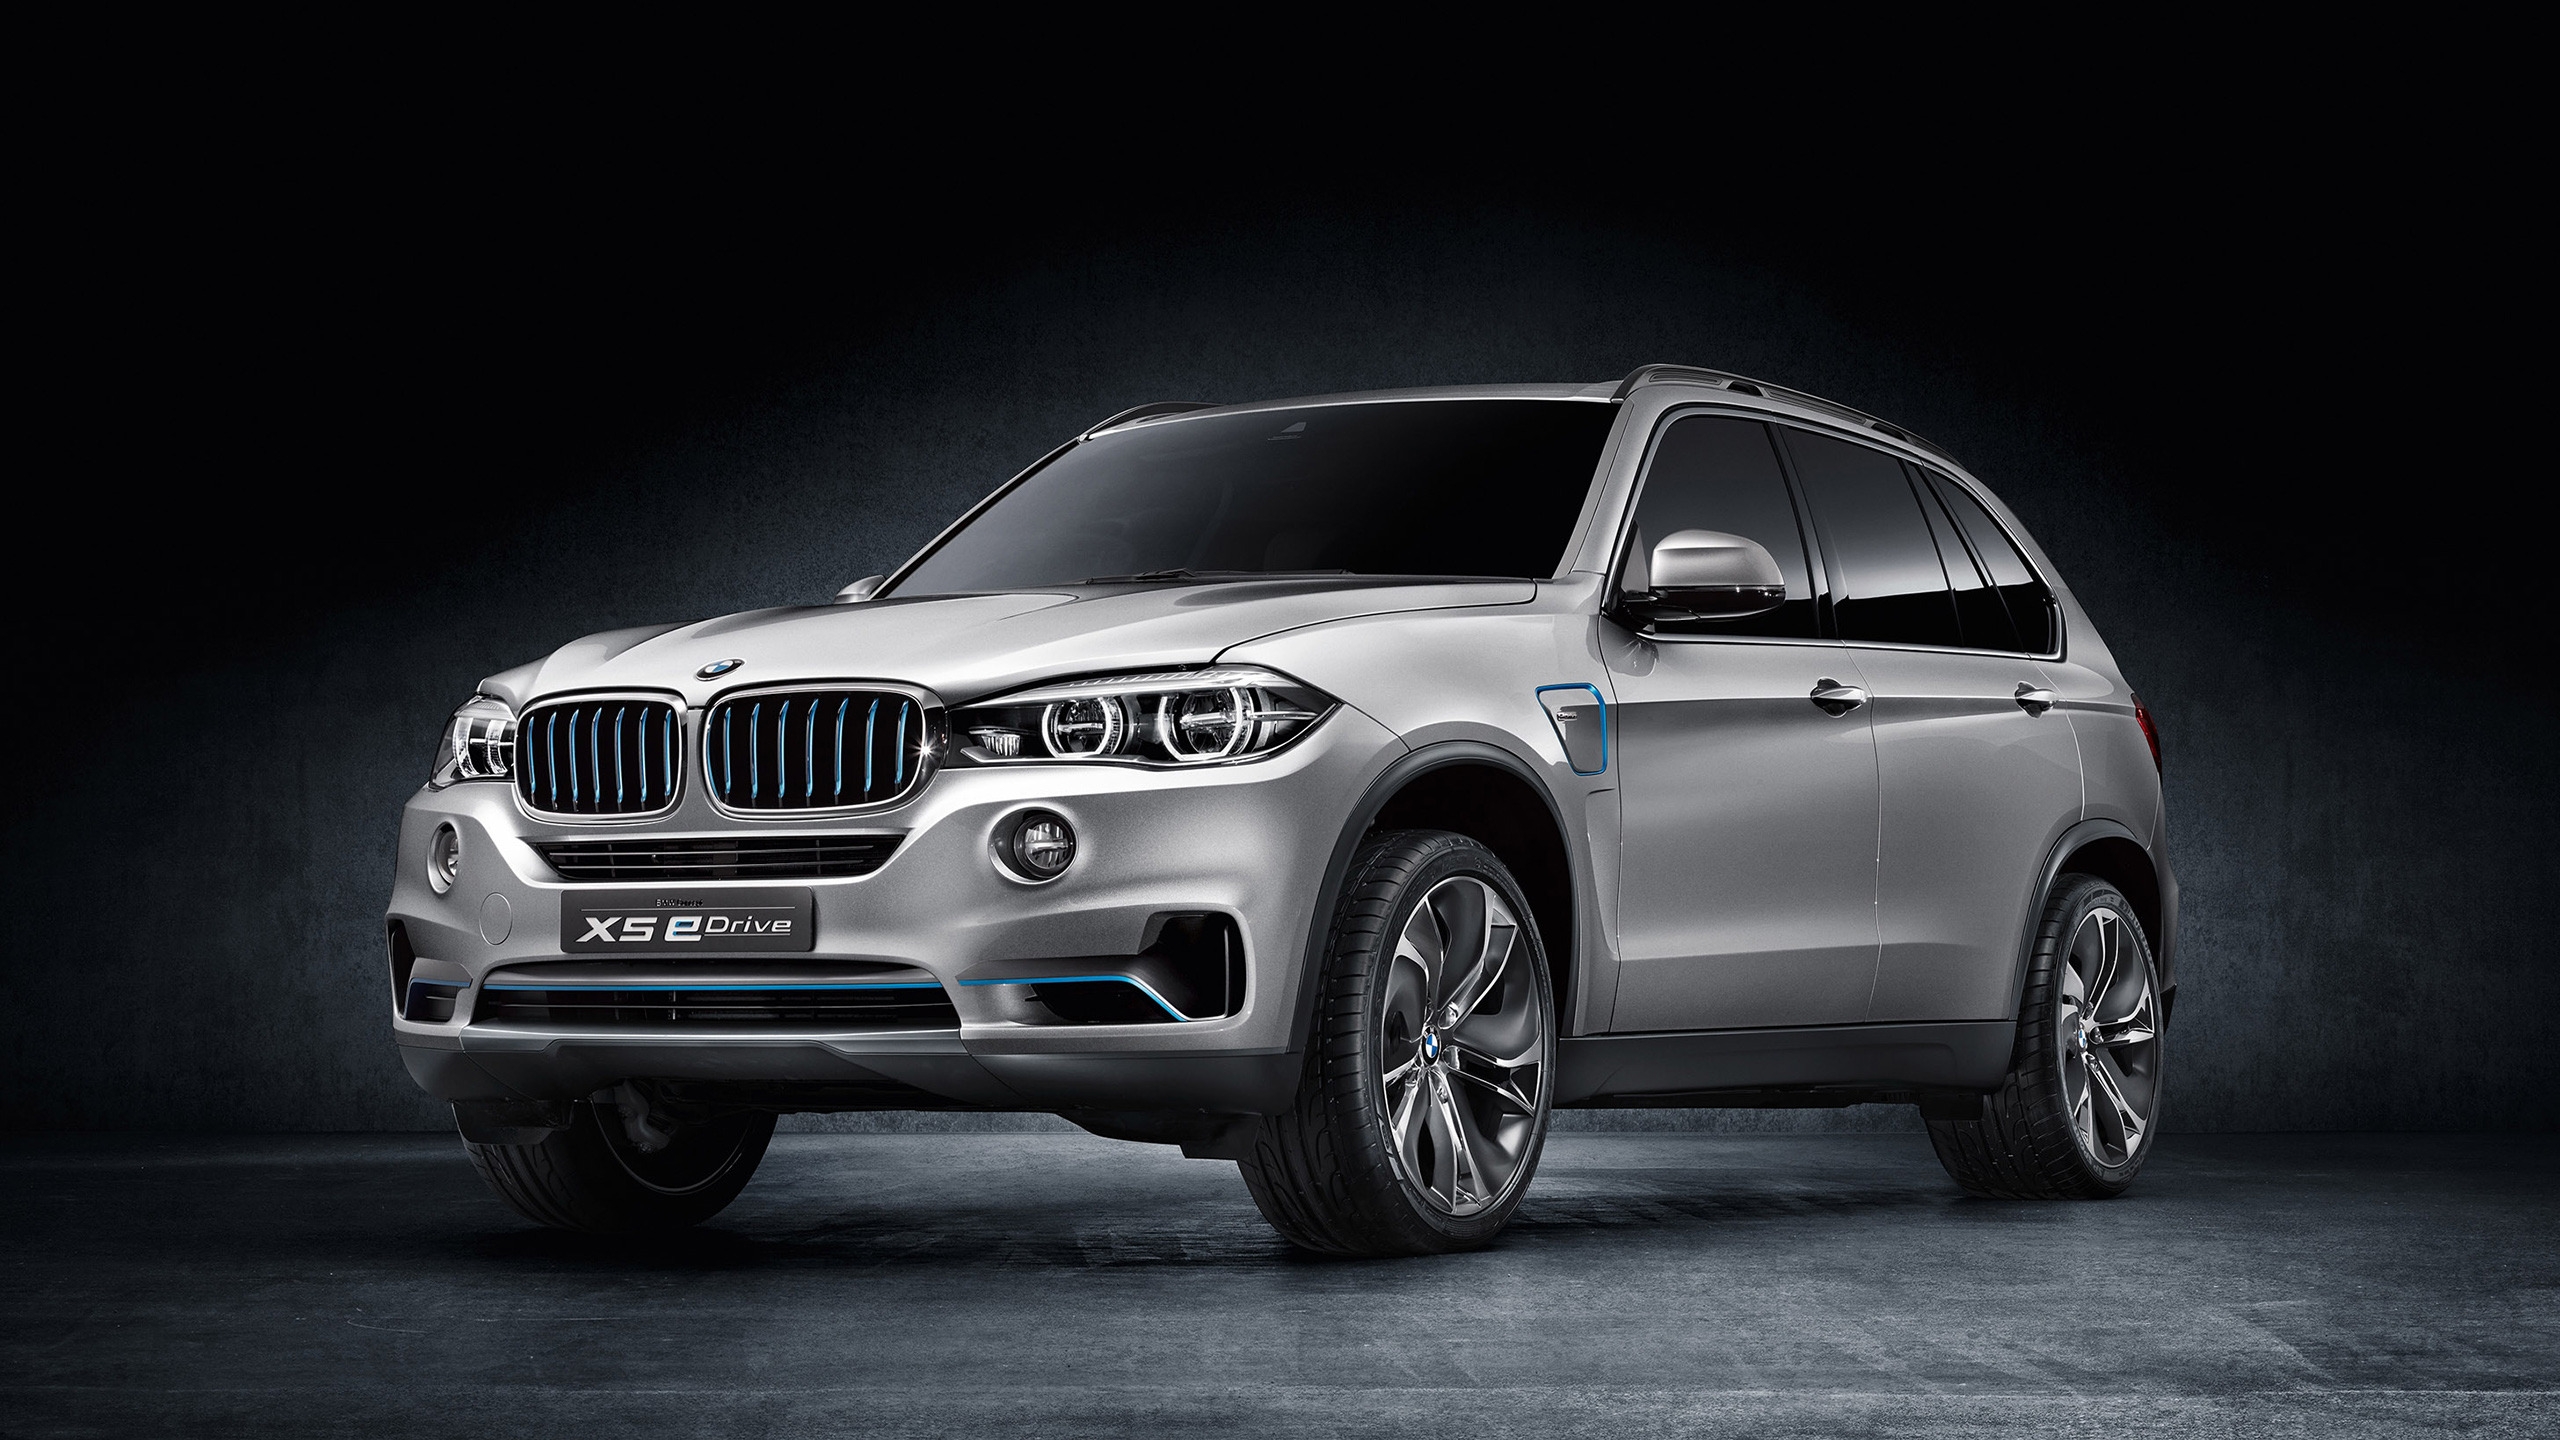 BMW X5 eDrive Concept for 2560x1440 HDTV resolution